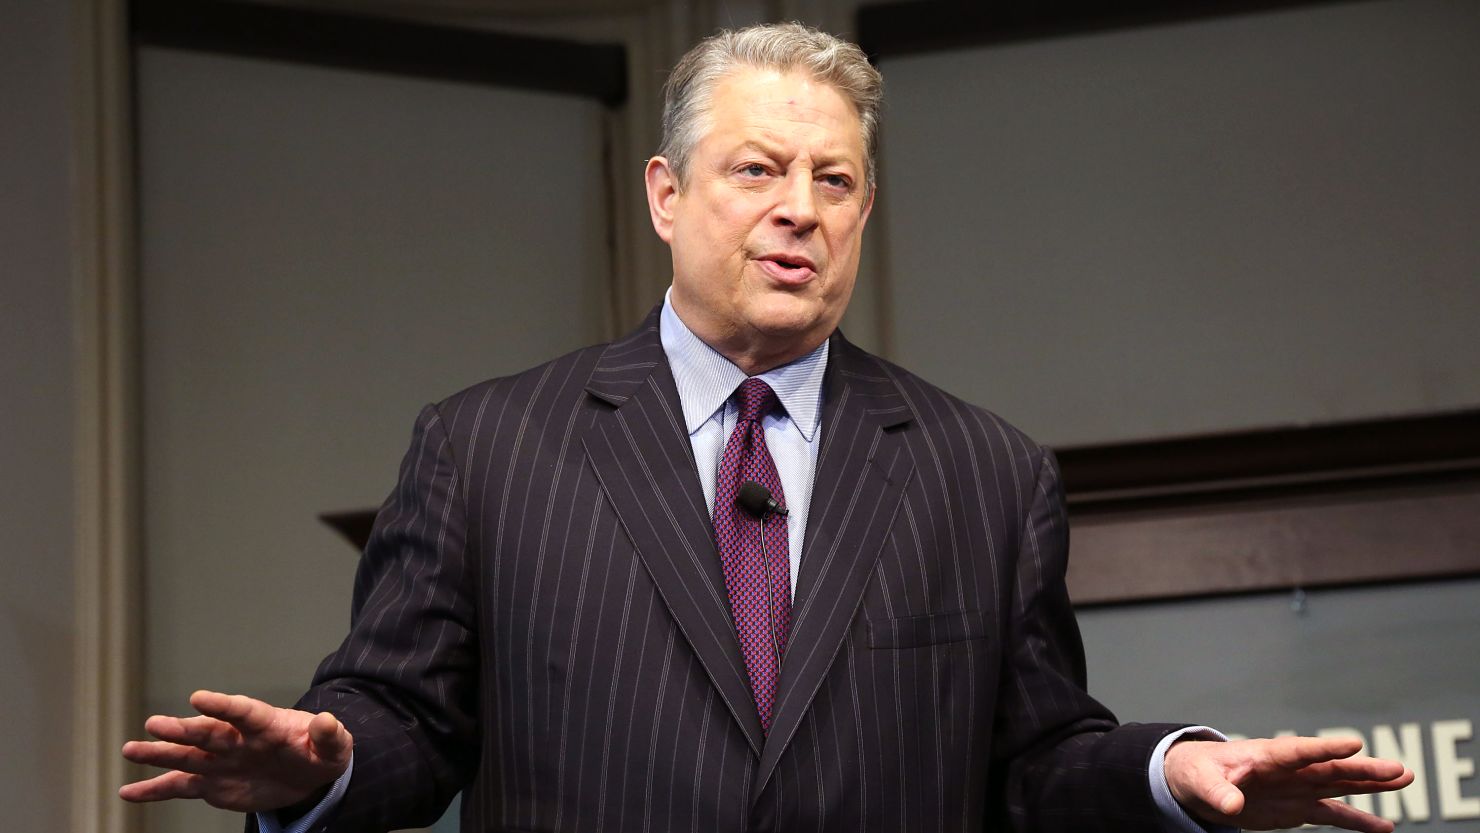 Former vice president Al Gore promotes his new book, "The Future" on January 30, 2013 in New York City.  